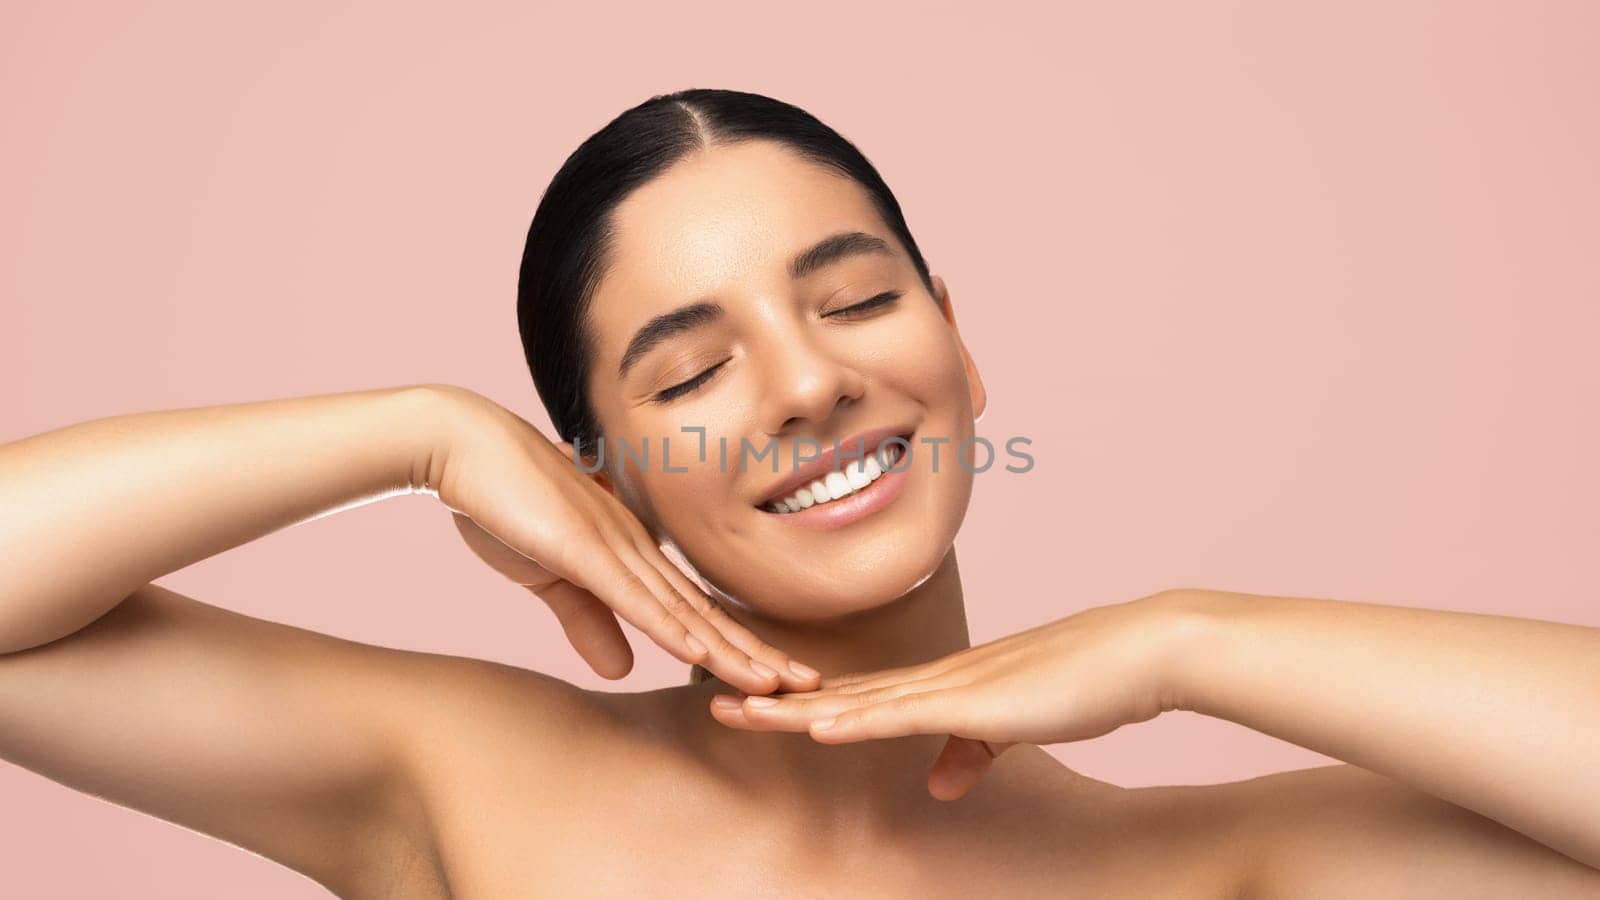 Beauty portrait of cheerful beautiful woman smiling with eyes closed tilted head and gentle hands next to face.